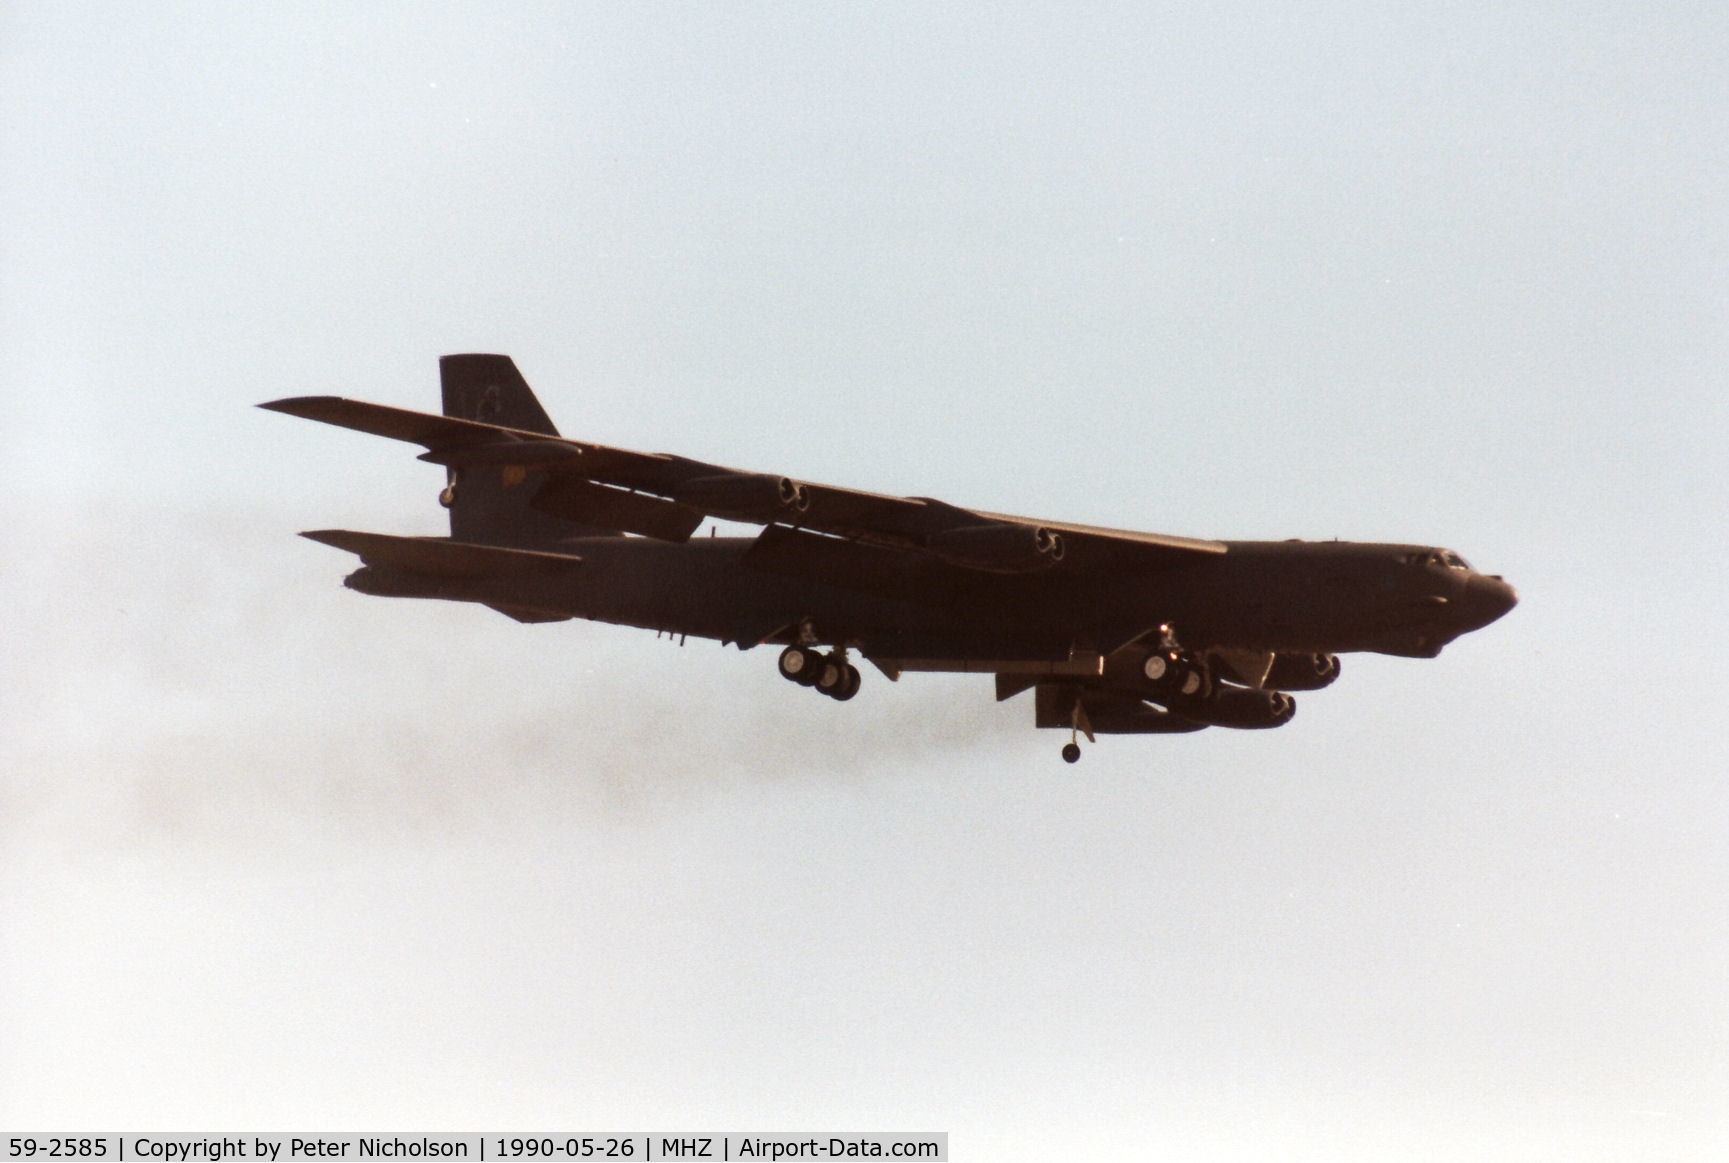 59-2585, 1959 Boeing B-52G Stratofortress C/N 464348, B-52G Stratofortress named Swashbuckler, callsign Moose 25 of 69th Bomb Squadron/42nd Bomb Wing at Loring AFB on a fly-past at the 1990 RAF Mildenhall Air Fete.